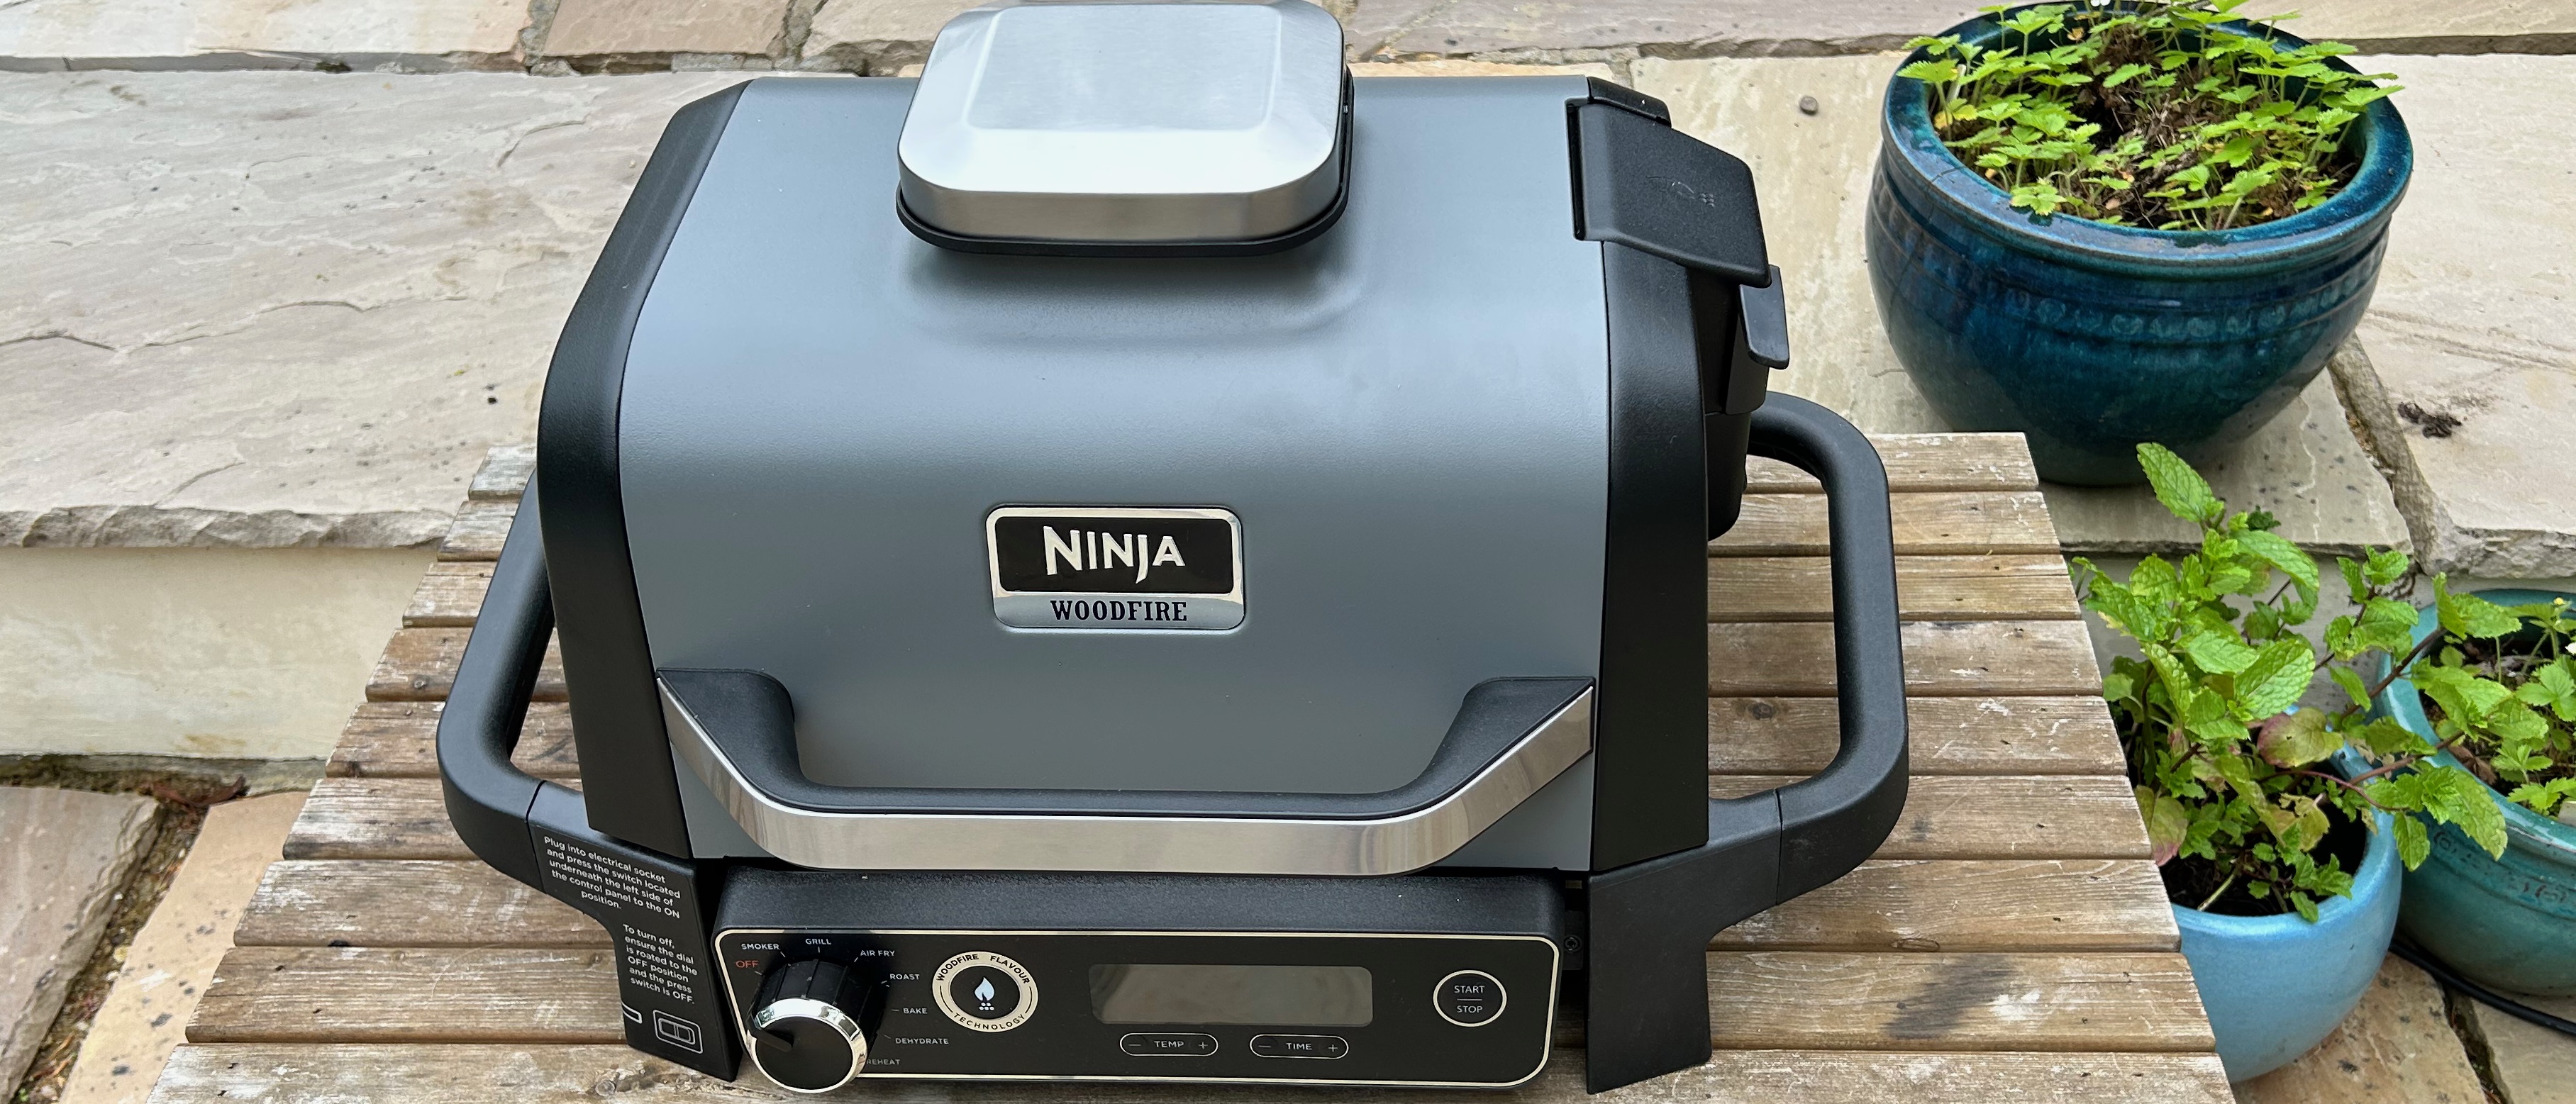 Ninja Woodfire review: outdoor cooking without charcoal or gas